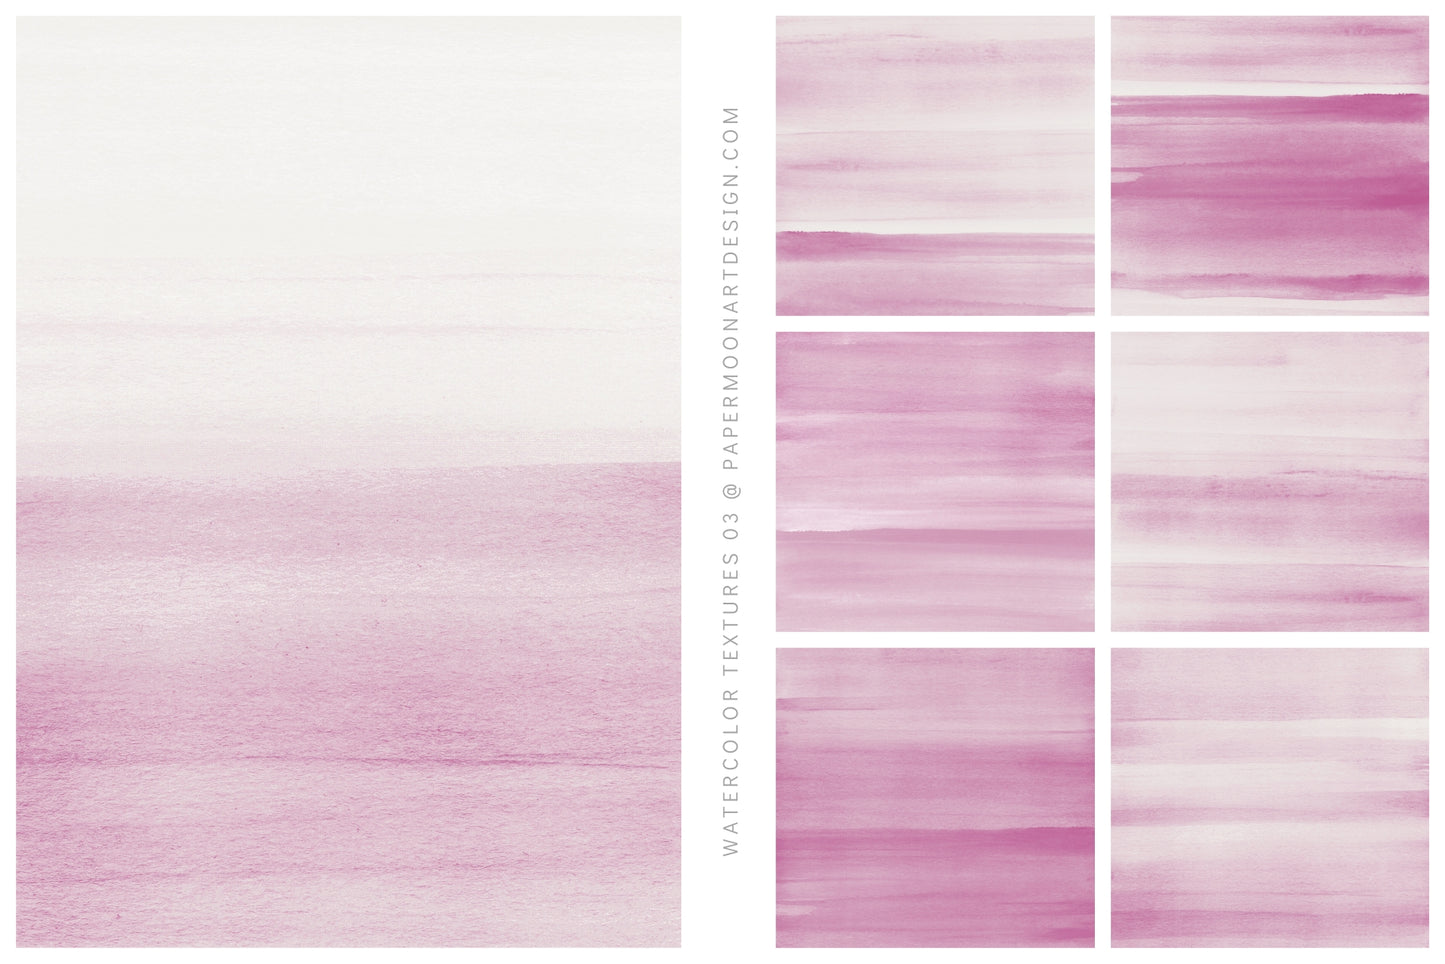 Watercolor Texture Backgrounds 03 Pink Blush Watercolor Textures